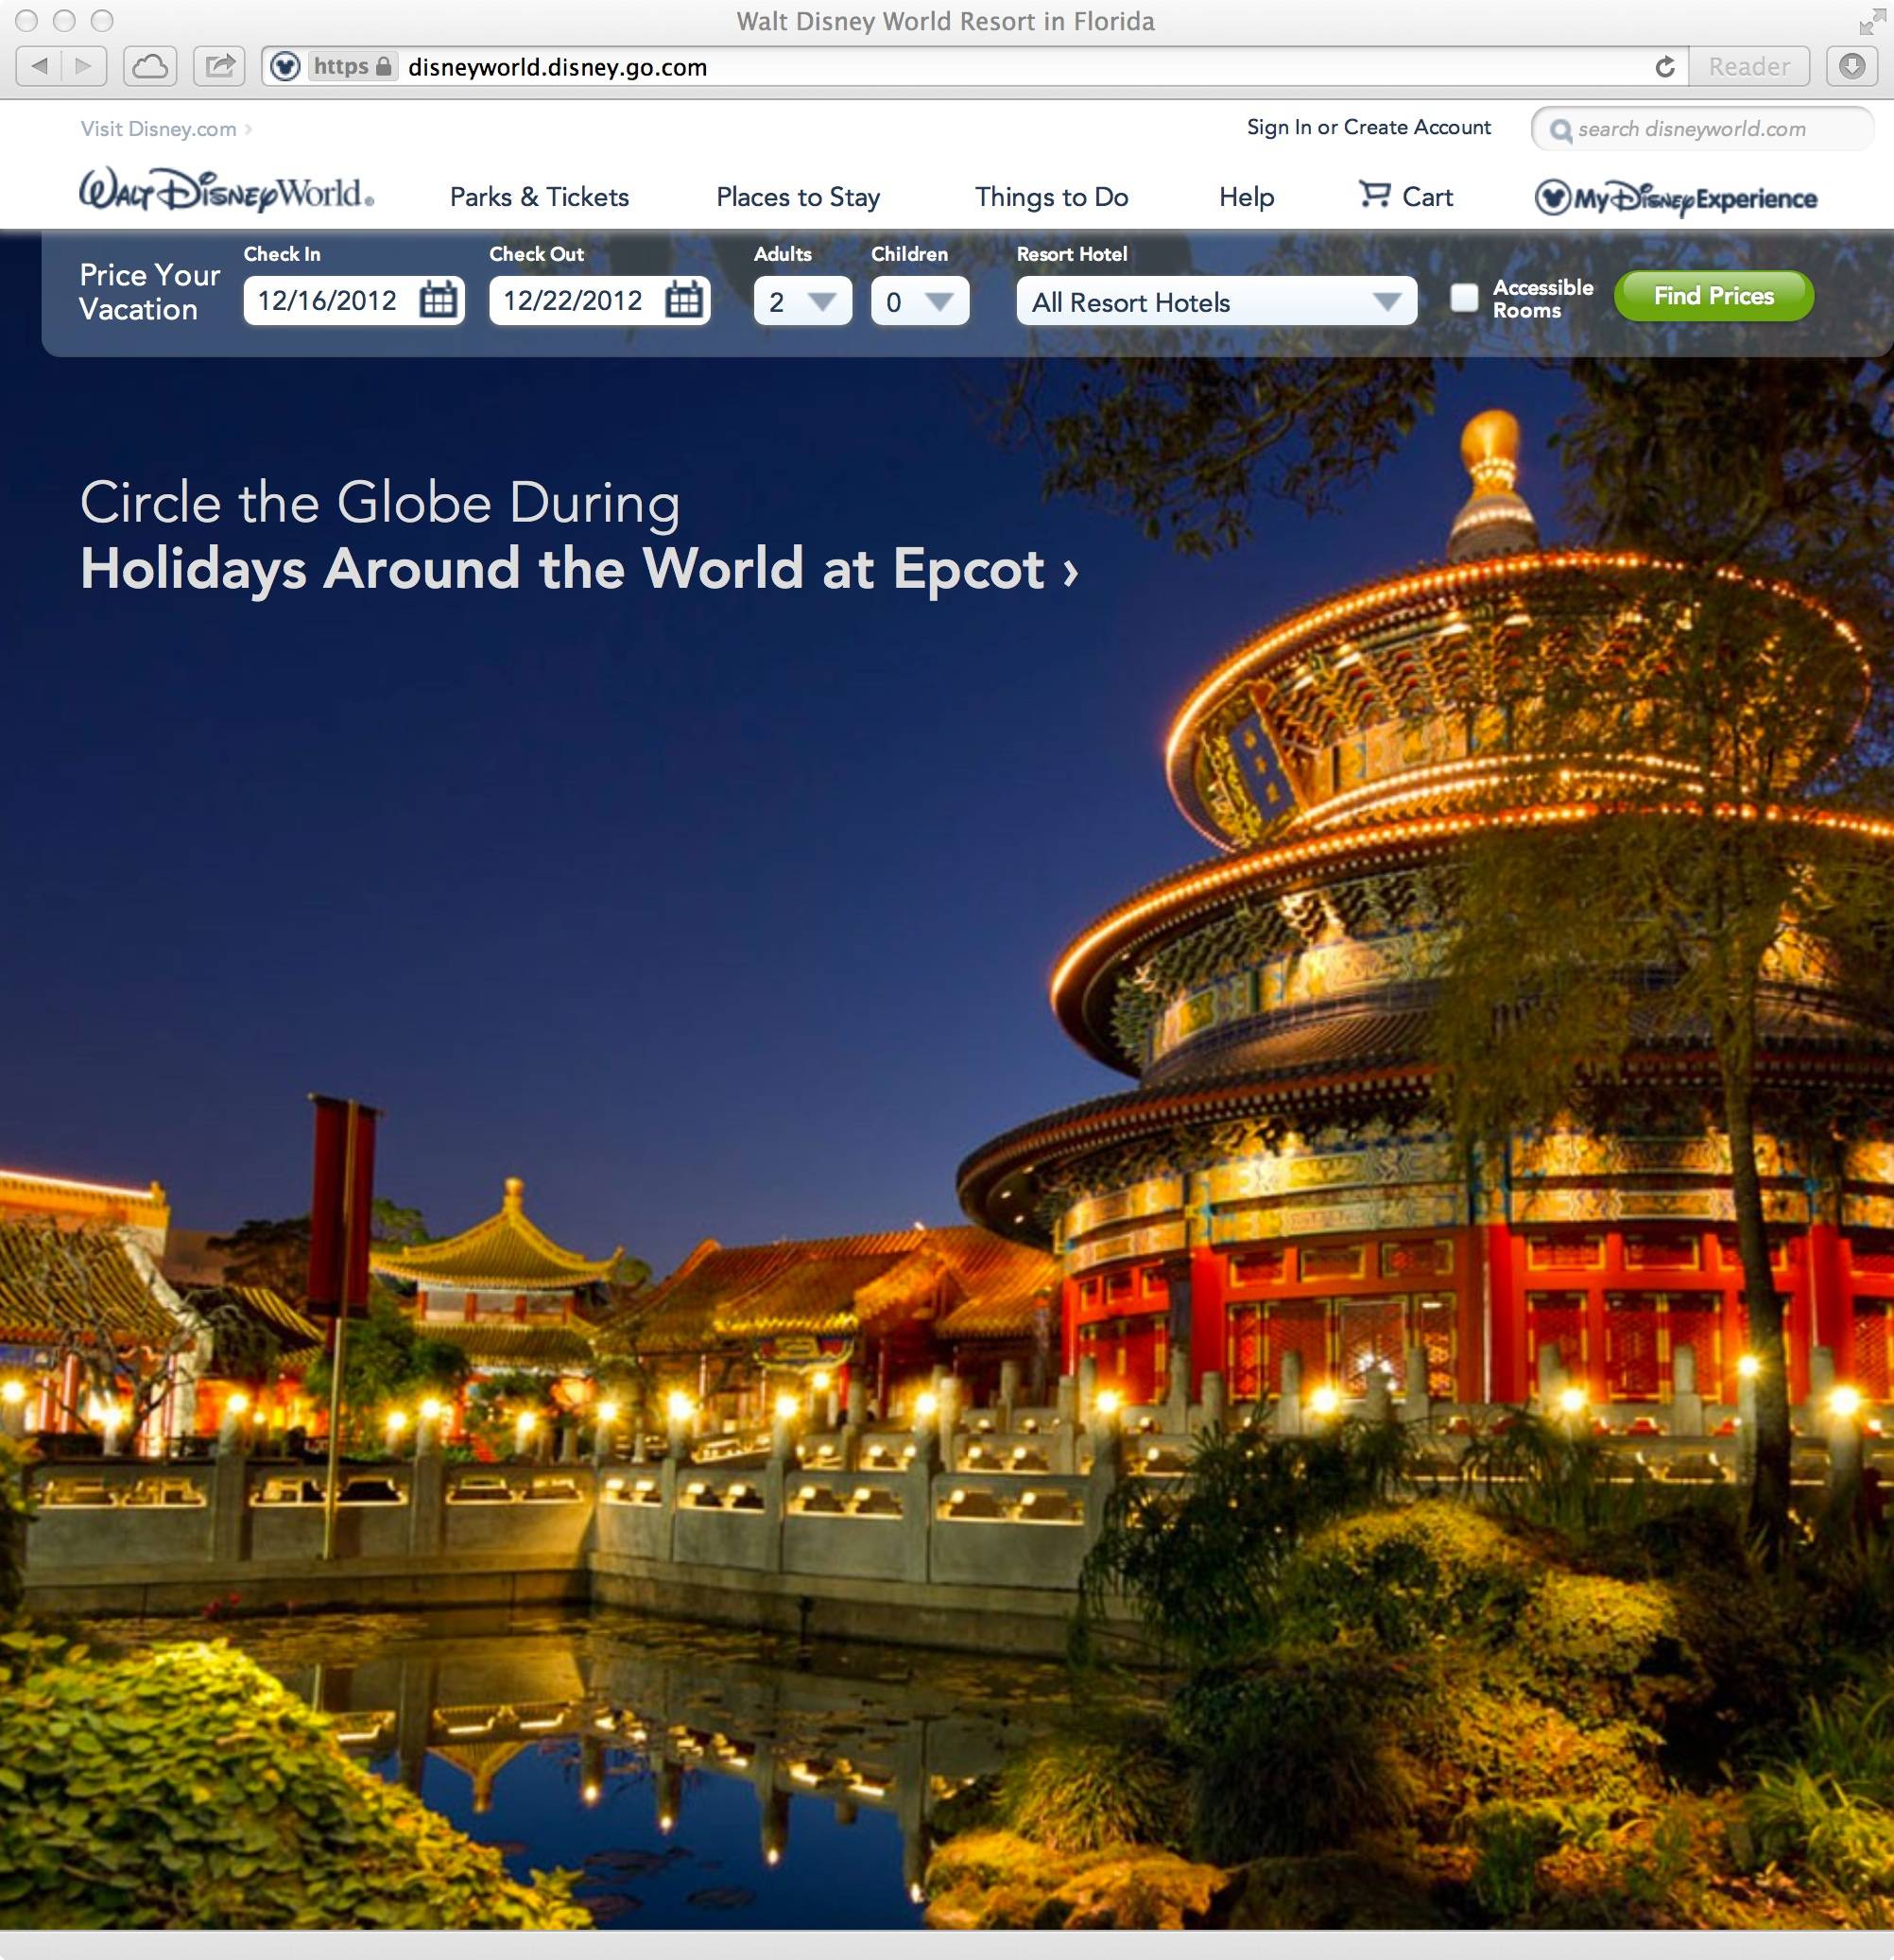 New official Walt Disney World website roll out begins including 'My Disney Experience'